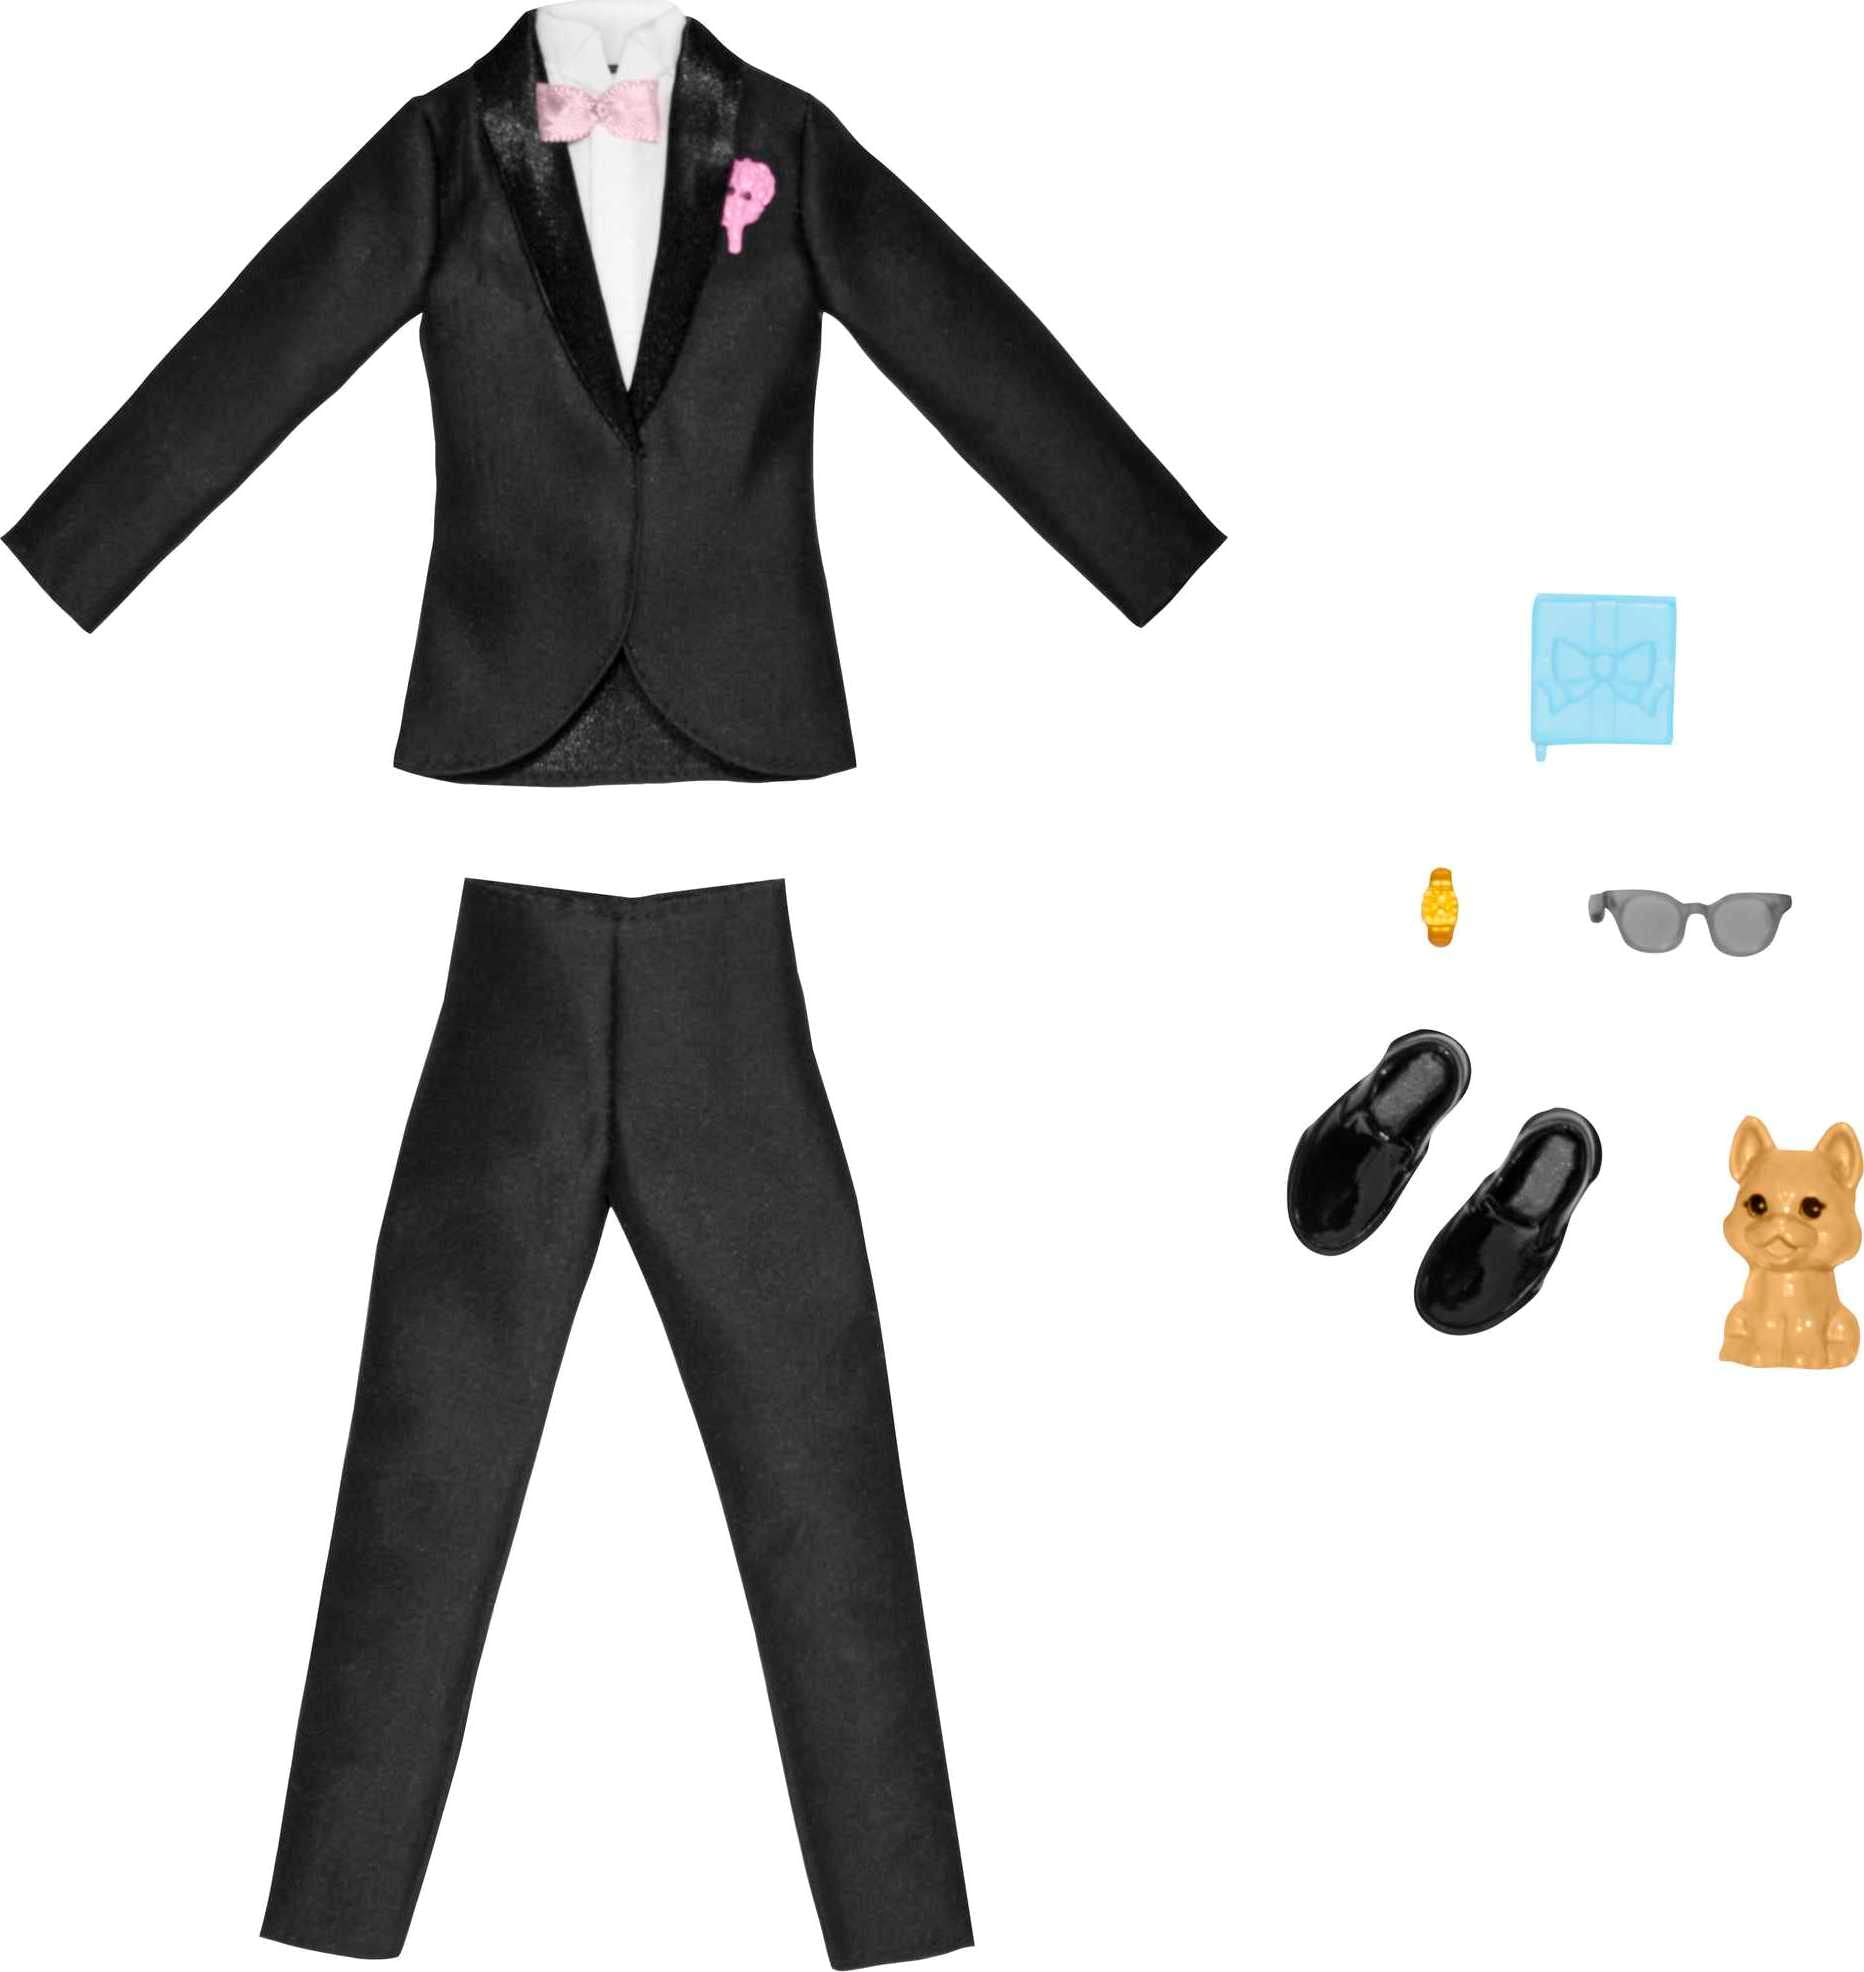 Barbie Fashions Ken Doll Clothes and Accessories Set, Groom On Wedding Day with Tuxedo, Puppy, Sunglasses and More